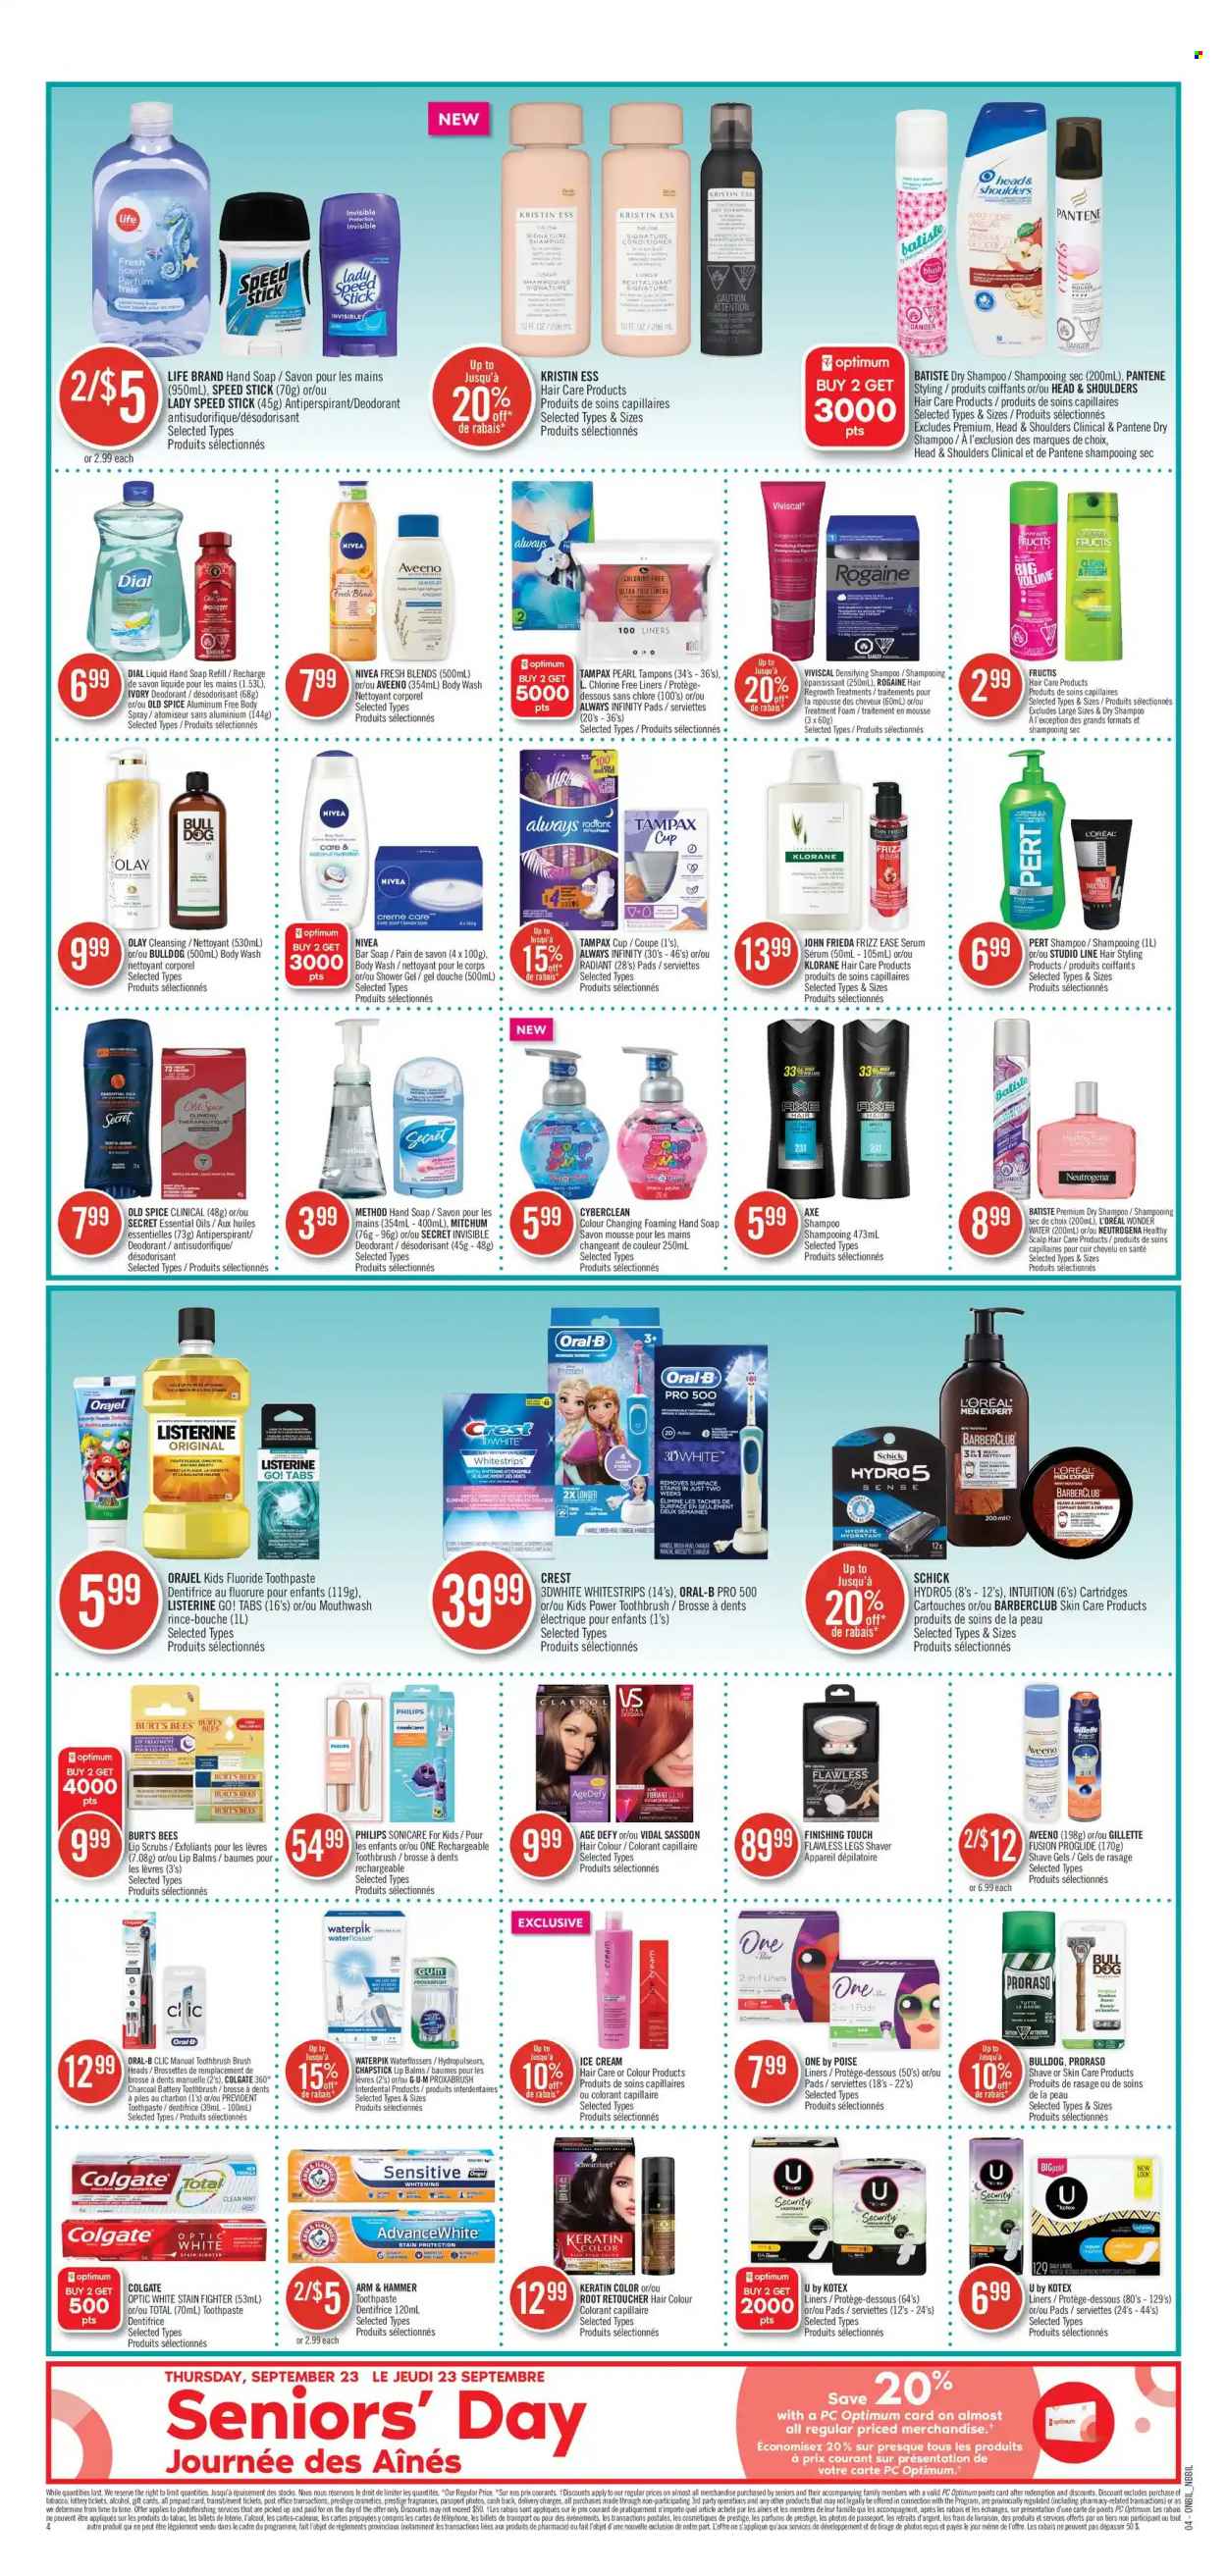 thumbnail - Shoppers Drug Mart Flyer - September 18, 2021 - September 24, 2021 - Sales products - Philips, ARM & HAMMER, spice, Aveeno, Rin, body wash, shower gel, hand soap, soap bar, Dial, soap, toothbrush, toothpaste, mouthwash, Crest, Kotex, tampons, Always Infinity, L’Oréal, serum, Olay, L’Oréal Men, Clairol, hair color, keratin, John Frieda, Klorane, Fructis, body spray, anti-perspirant, Speed Stick, Schick, shaver, Sonicare, Go!, alcohol, Colgate, Gillette, Listerine, Neutrogena, shampoo, Tampax, Head & Shoulders, Pantene, Nivea, Old Spice, Oral-B, Schwarzkopf, deodorant. Page 4.